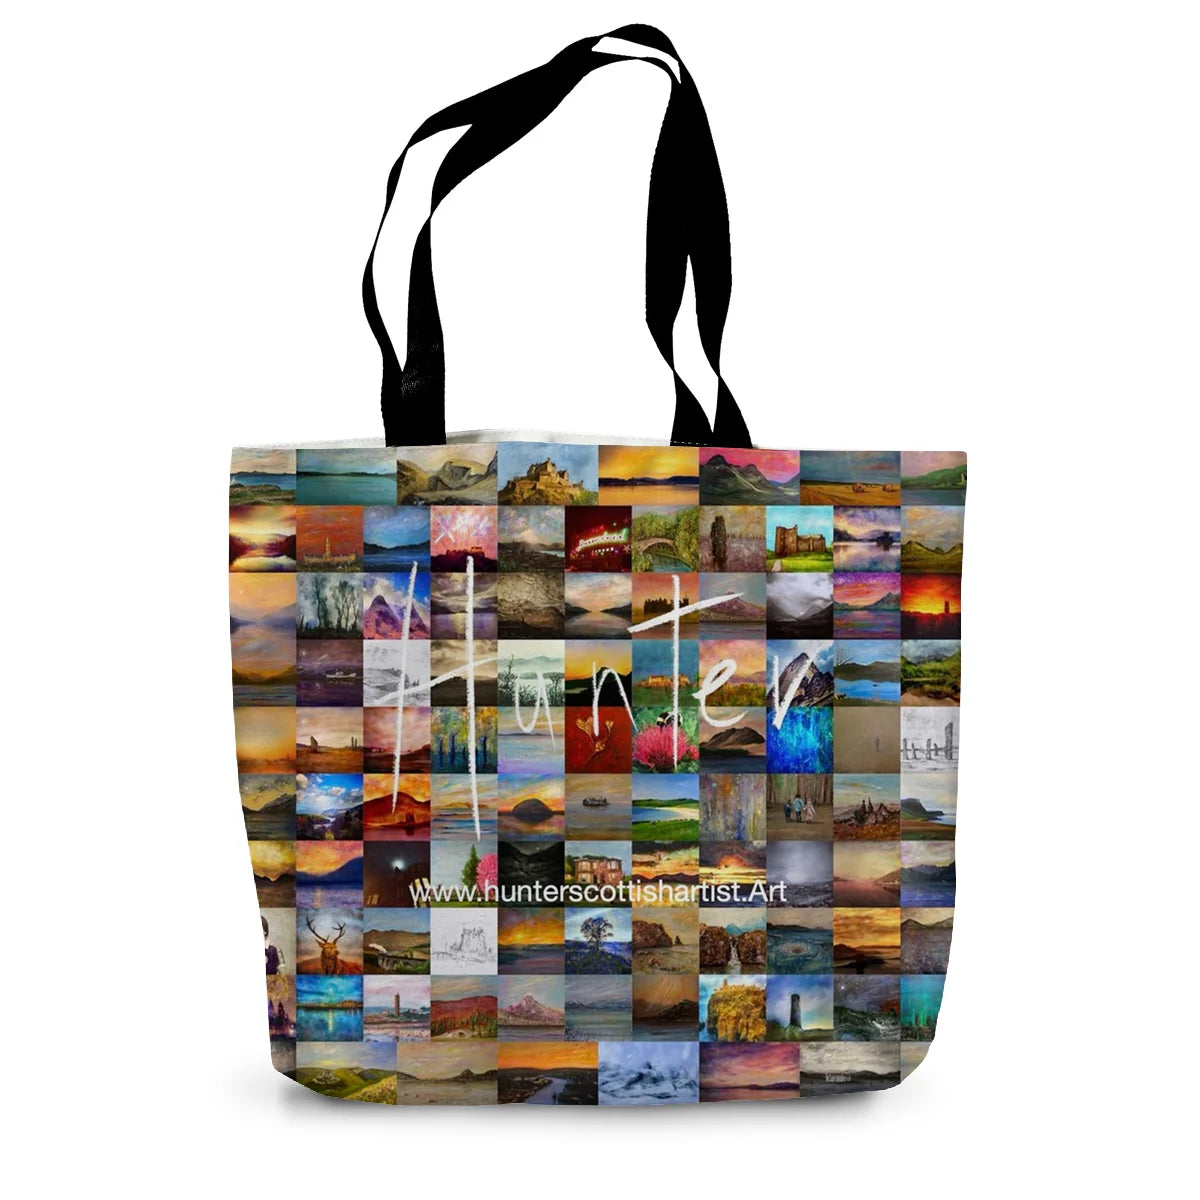 A Brooding Glencoe Art Gifts Canvas Tote Bag-Bags-Glencoe Art Gallery-14"x18.5"-Paintings, Prints, Homeware, Art Gifts From Scotland By Scottish Artist Kevin Hunter